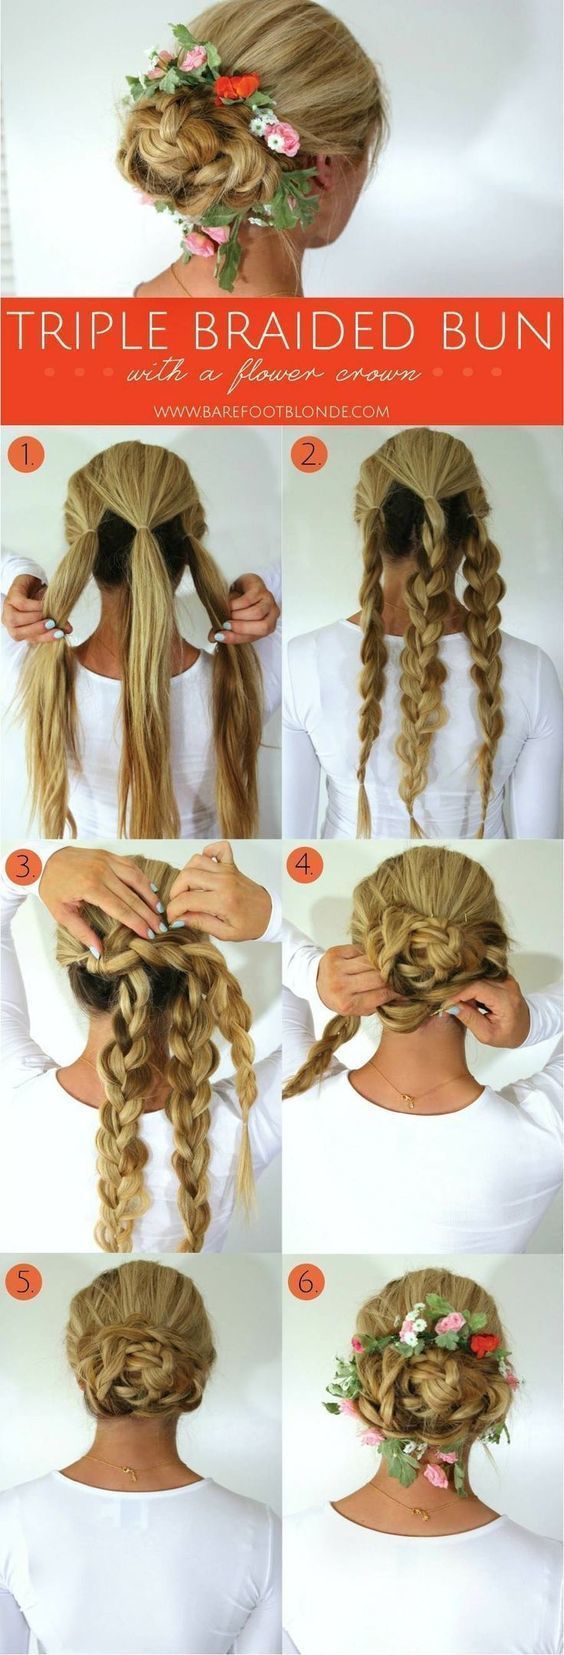 https://image.sistacafe.com/images/uploads/content_image/image/221070/1475206687-easy-hairstyles-17.jpg